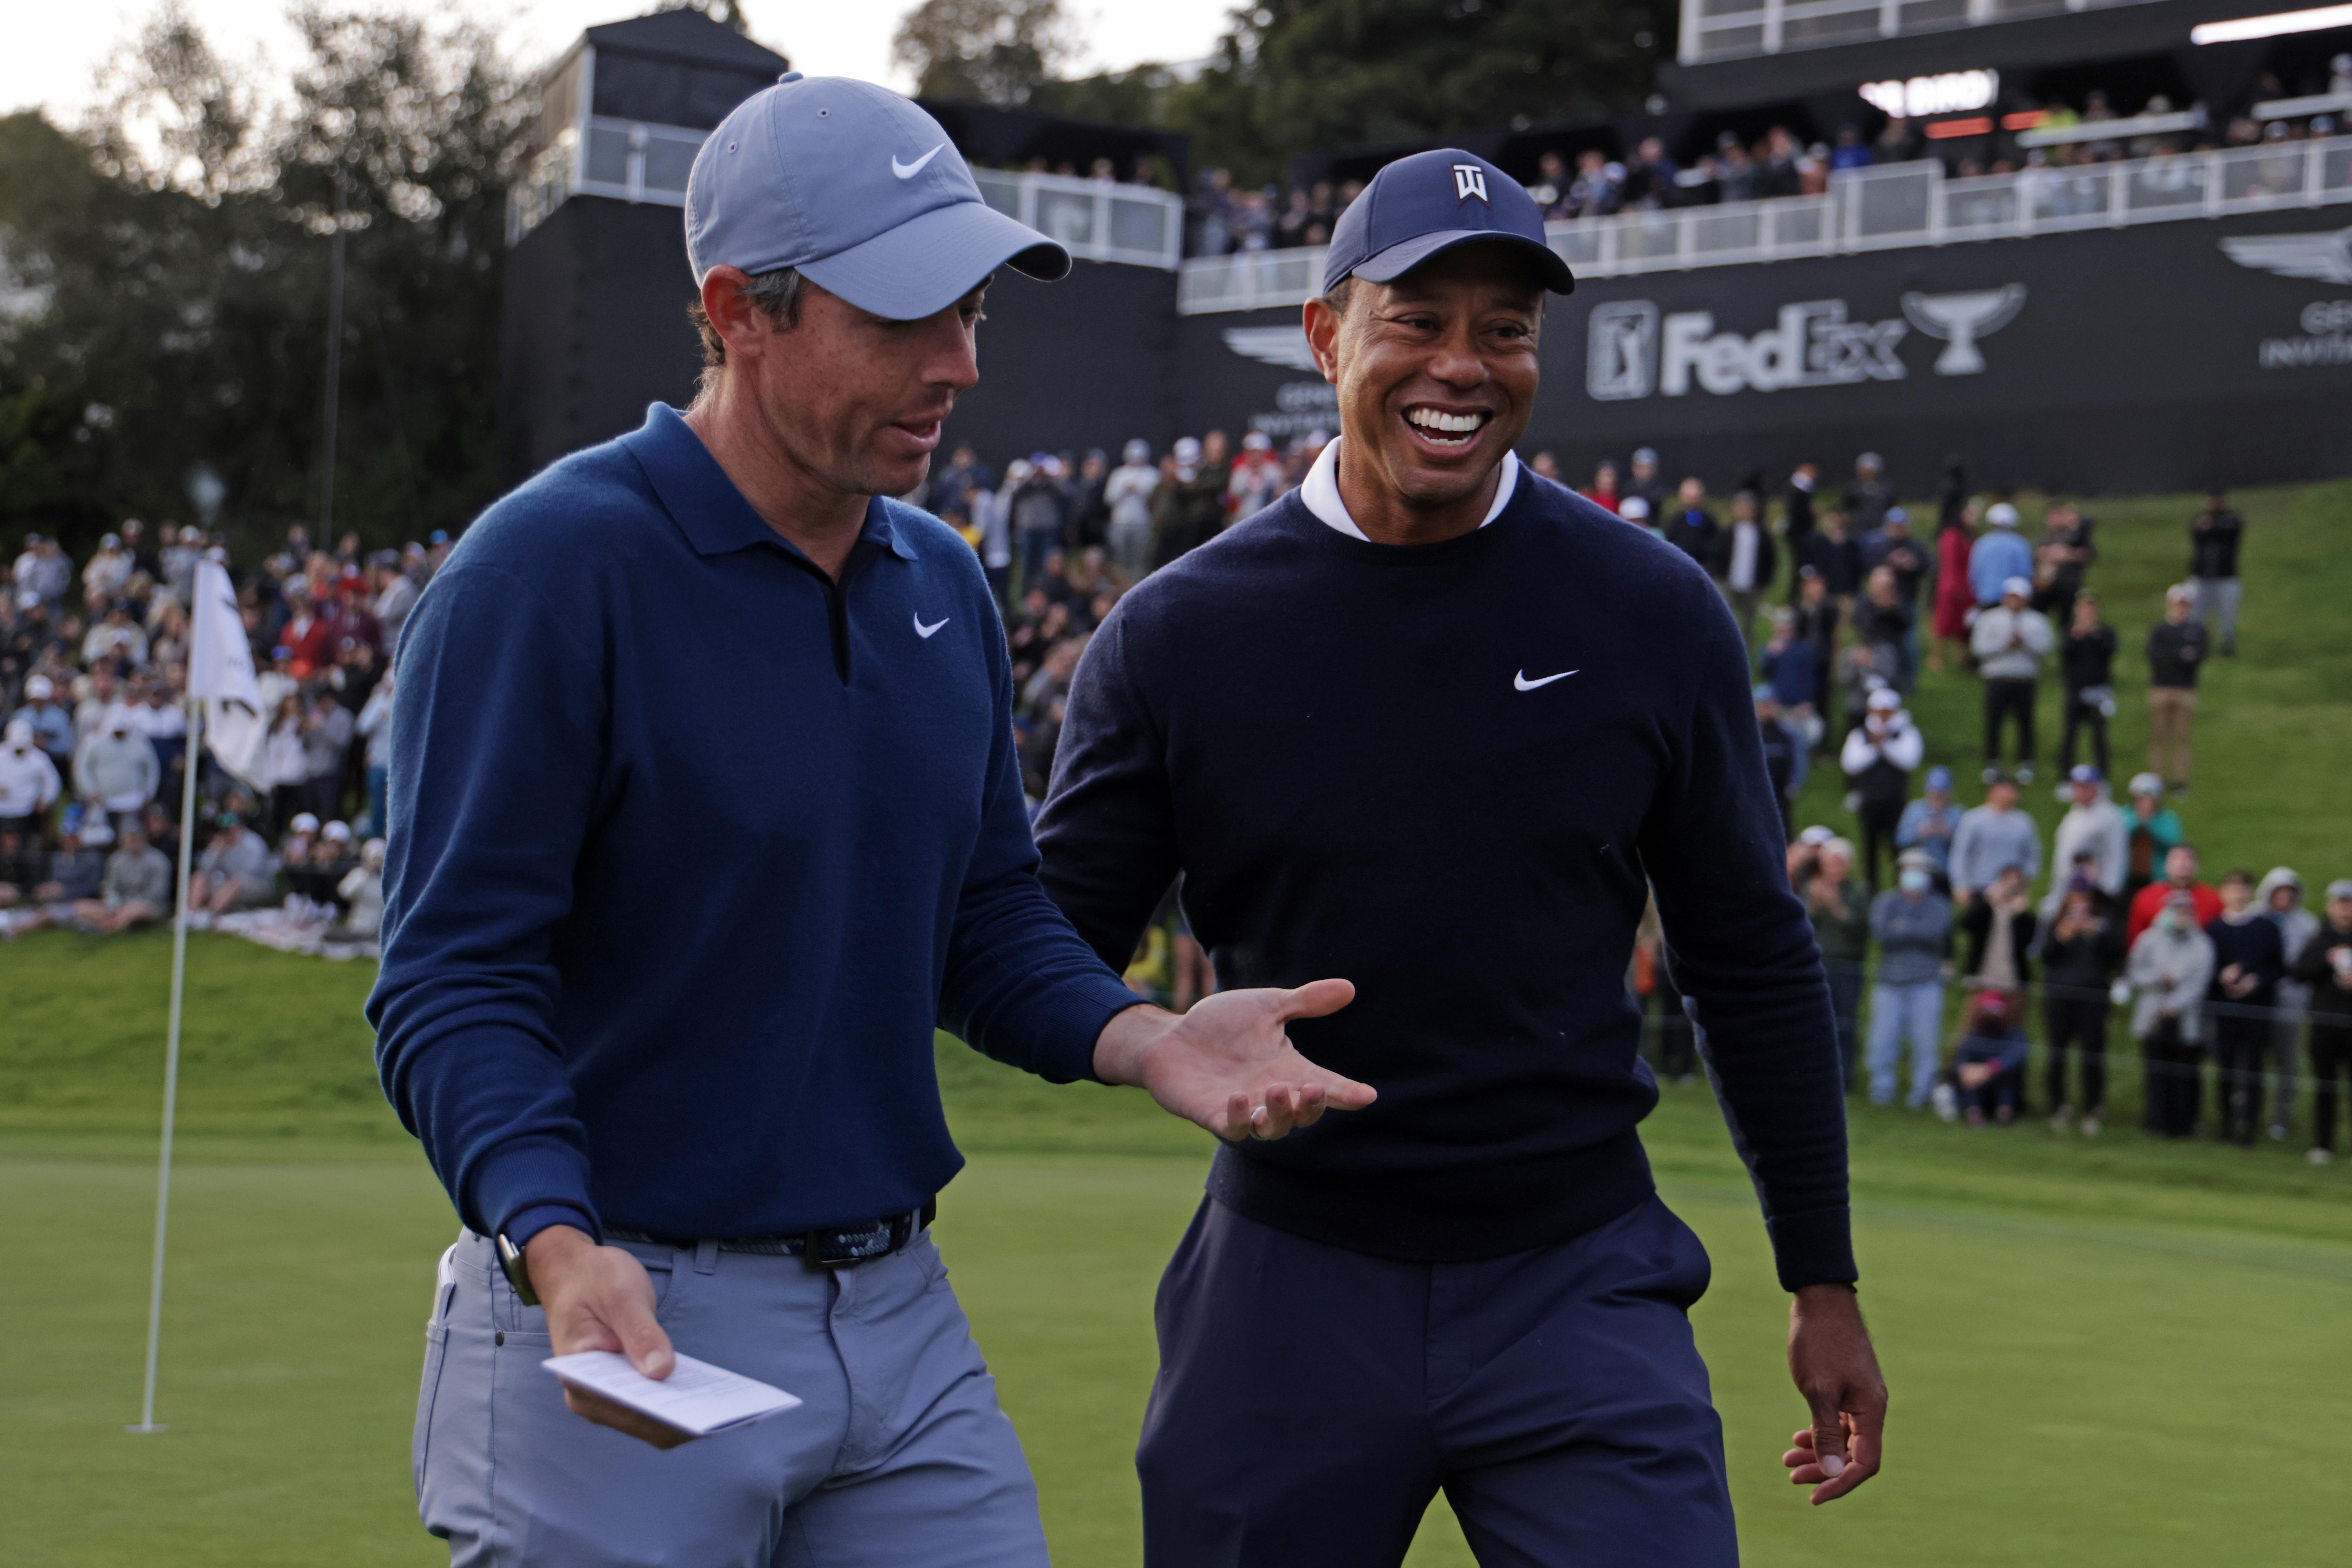 Rory smiling and shrugging as Tiger pats him on the back and laughs